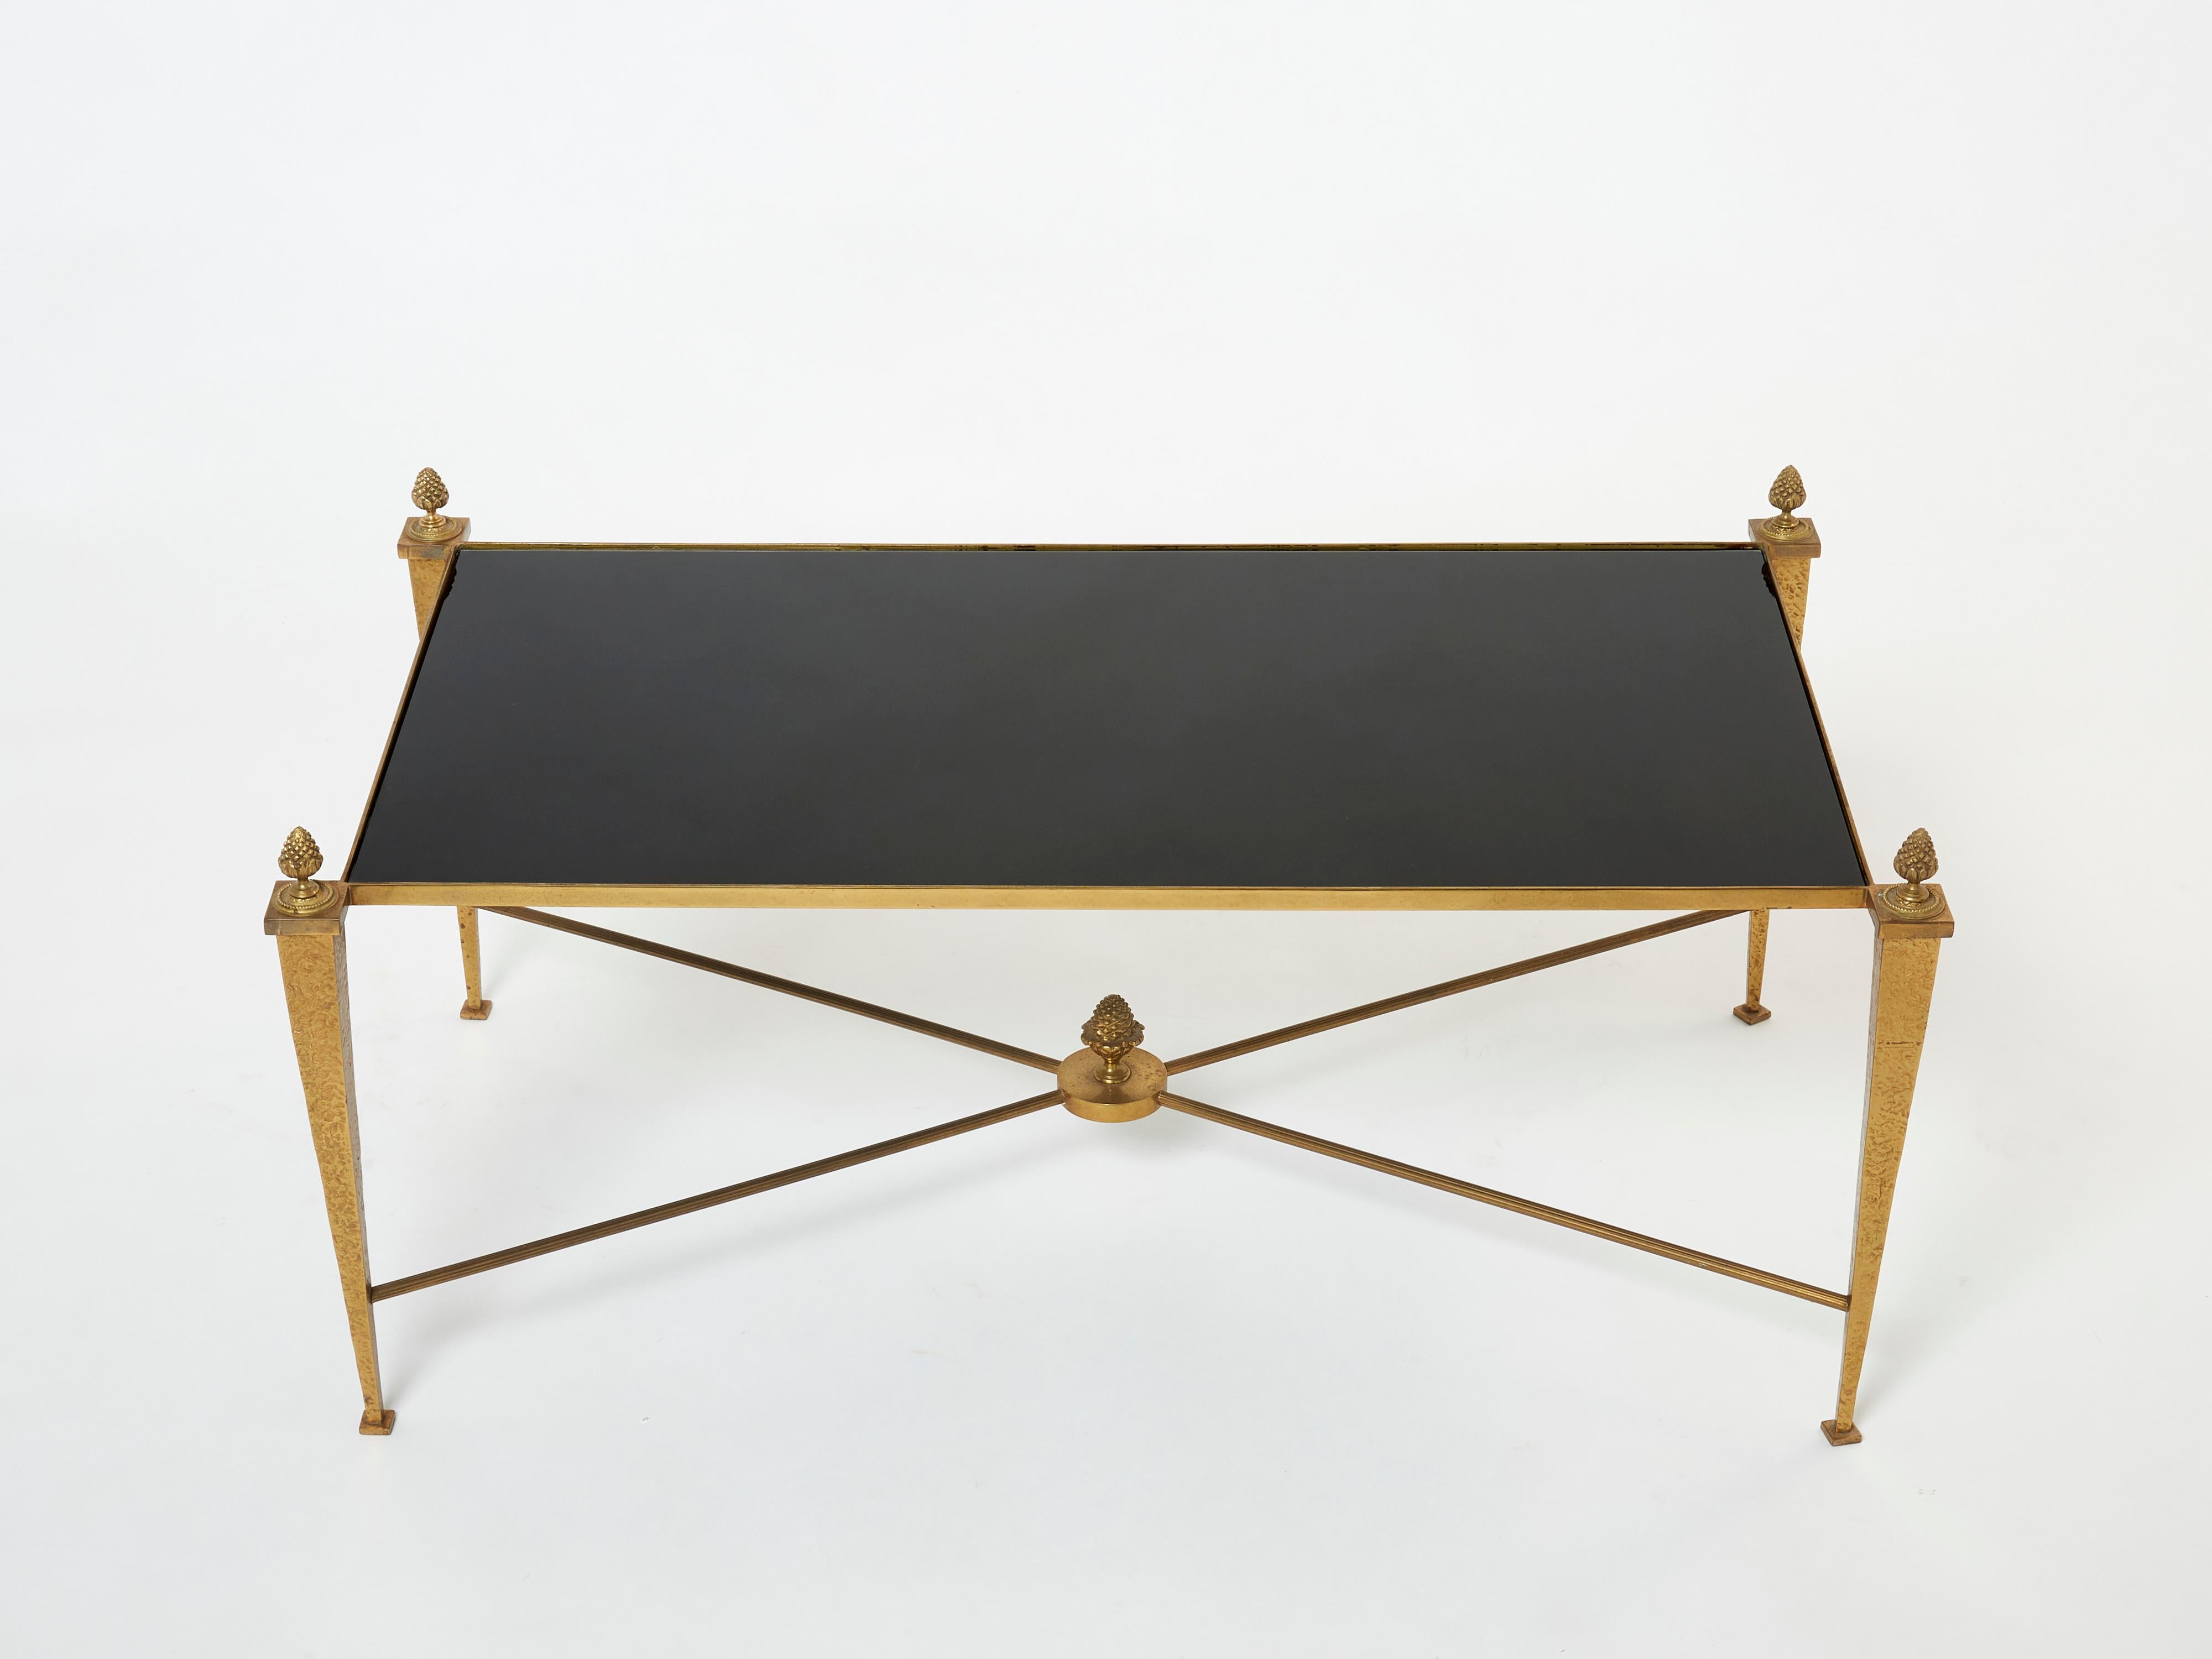 This coffee table by French design house Maison Ramsay was created with high-quality materials, sleek black opaline glass top, gilded wrought iron brass. The black opaline surface is impossibly smooth, while the gilt feet and brass pine cone details